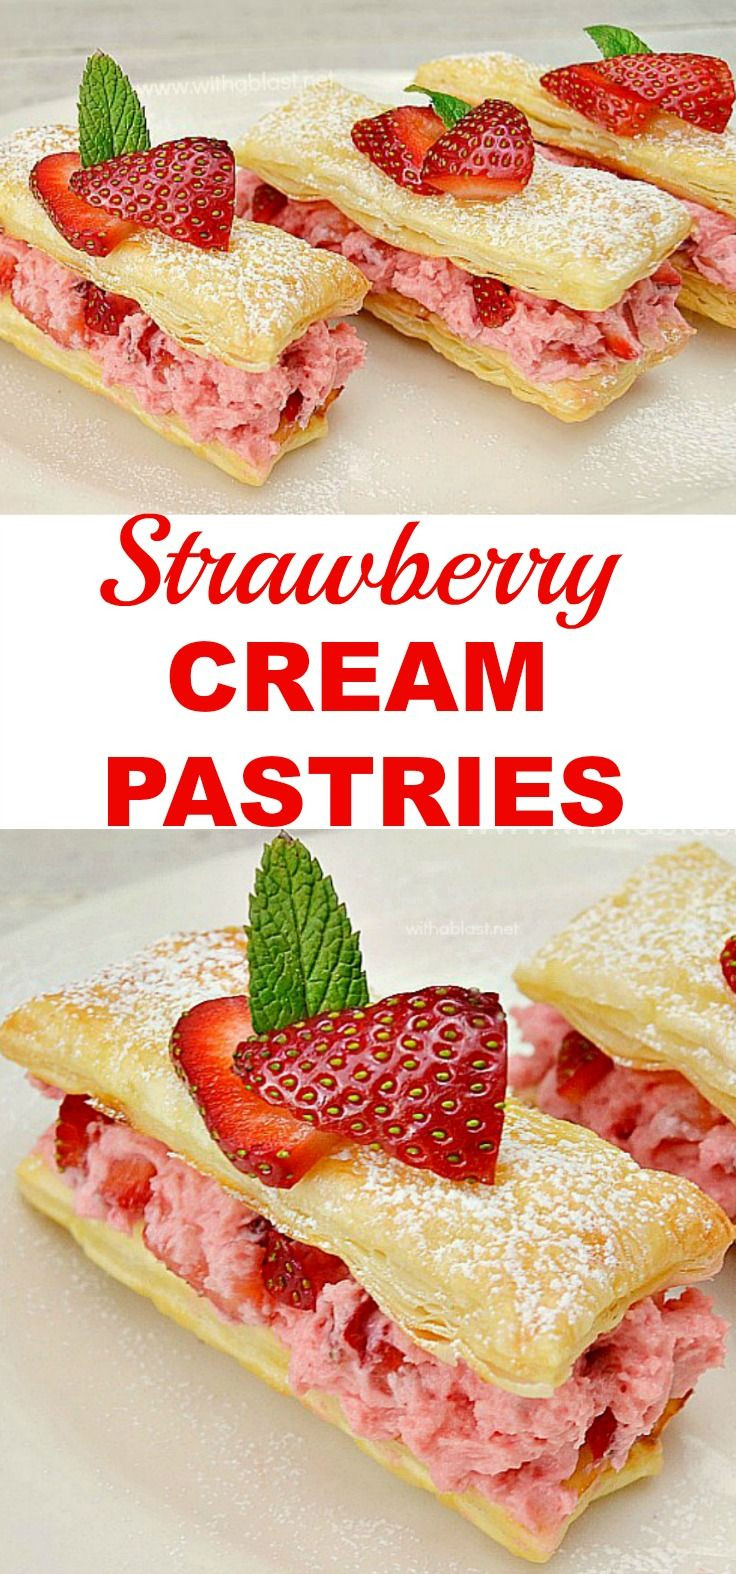 Valentine Desserts For A Crowd
 Easiest Strawberry Cream Pastries ever for Valentines Day